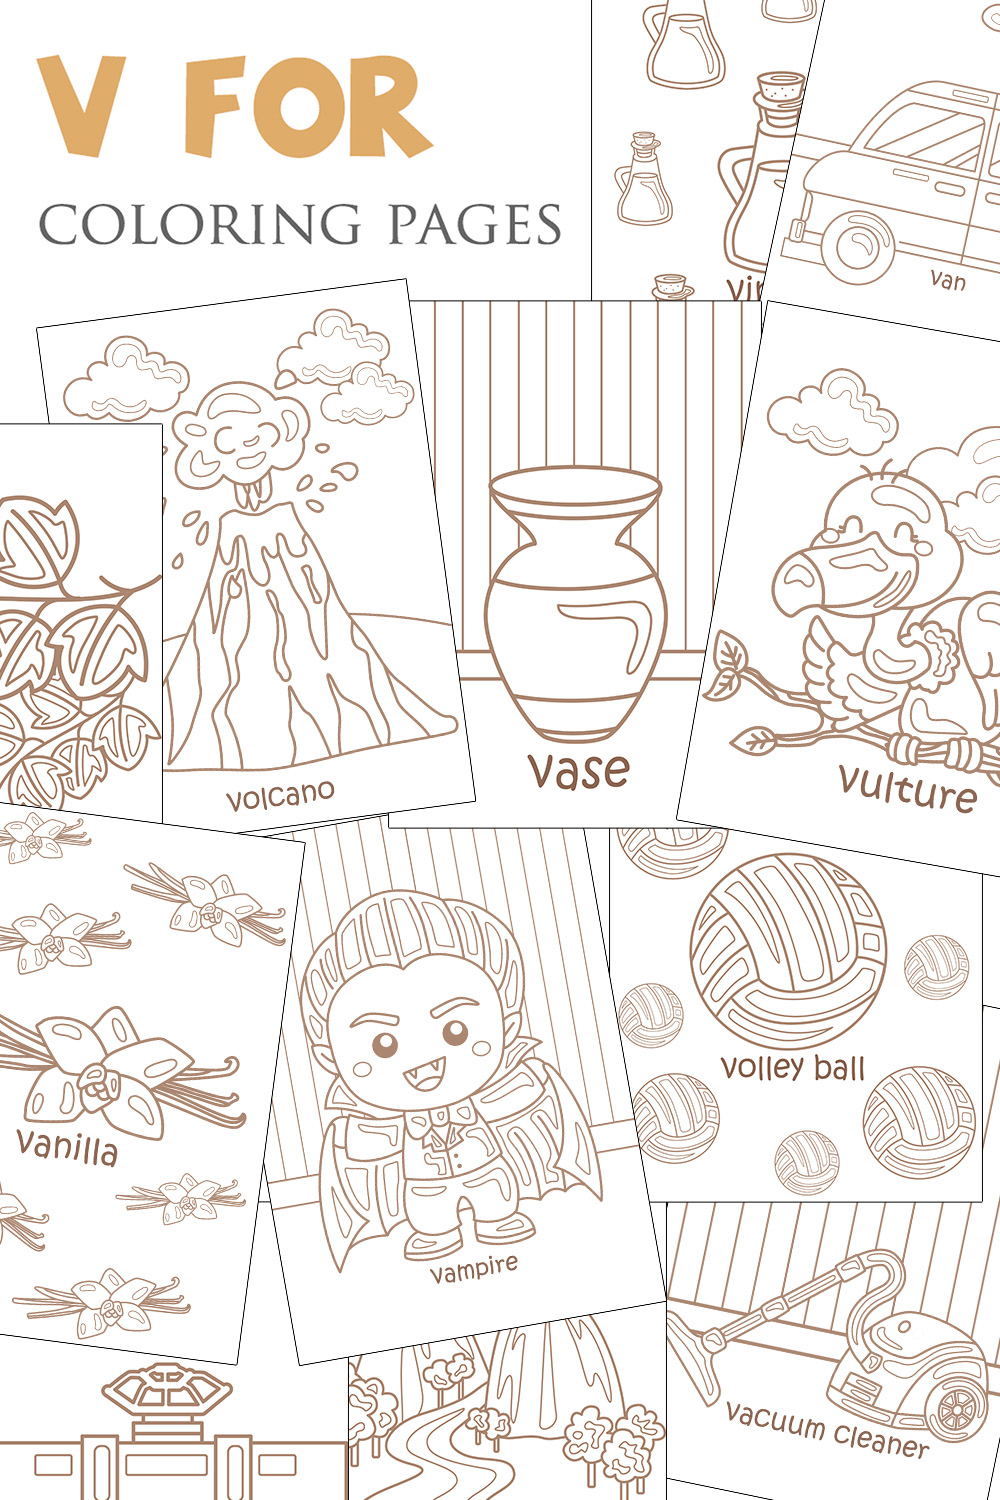 Alphabet V For Vocabulary School Letter Reading Writing Font Study Learning Student Toodler Kids Valve Volley Ball Vampire Vulture Van Vanilla Vacuum Cleaner Vinegar Vase Volcano Vines Valley Cartoon Lesson Coloring Pages For Kids and Adult Activity pinterest preview image.